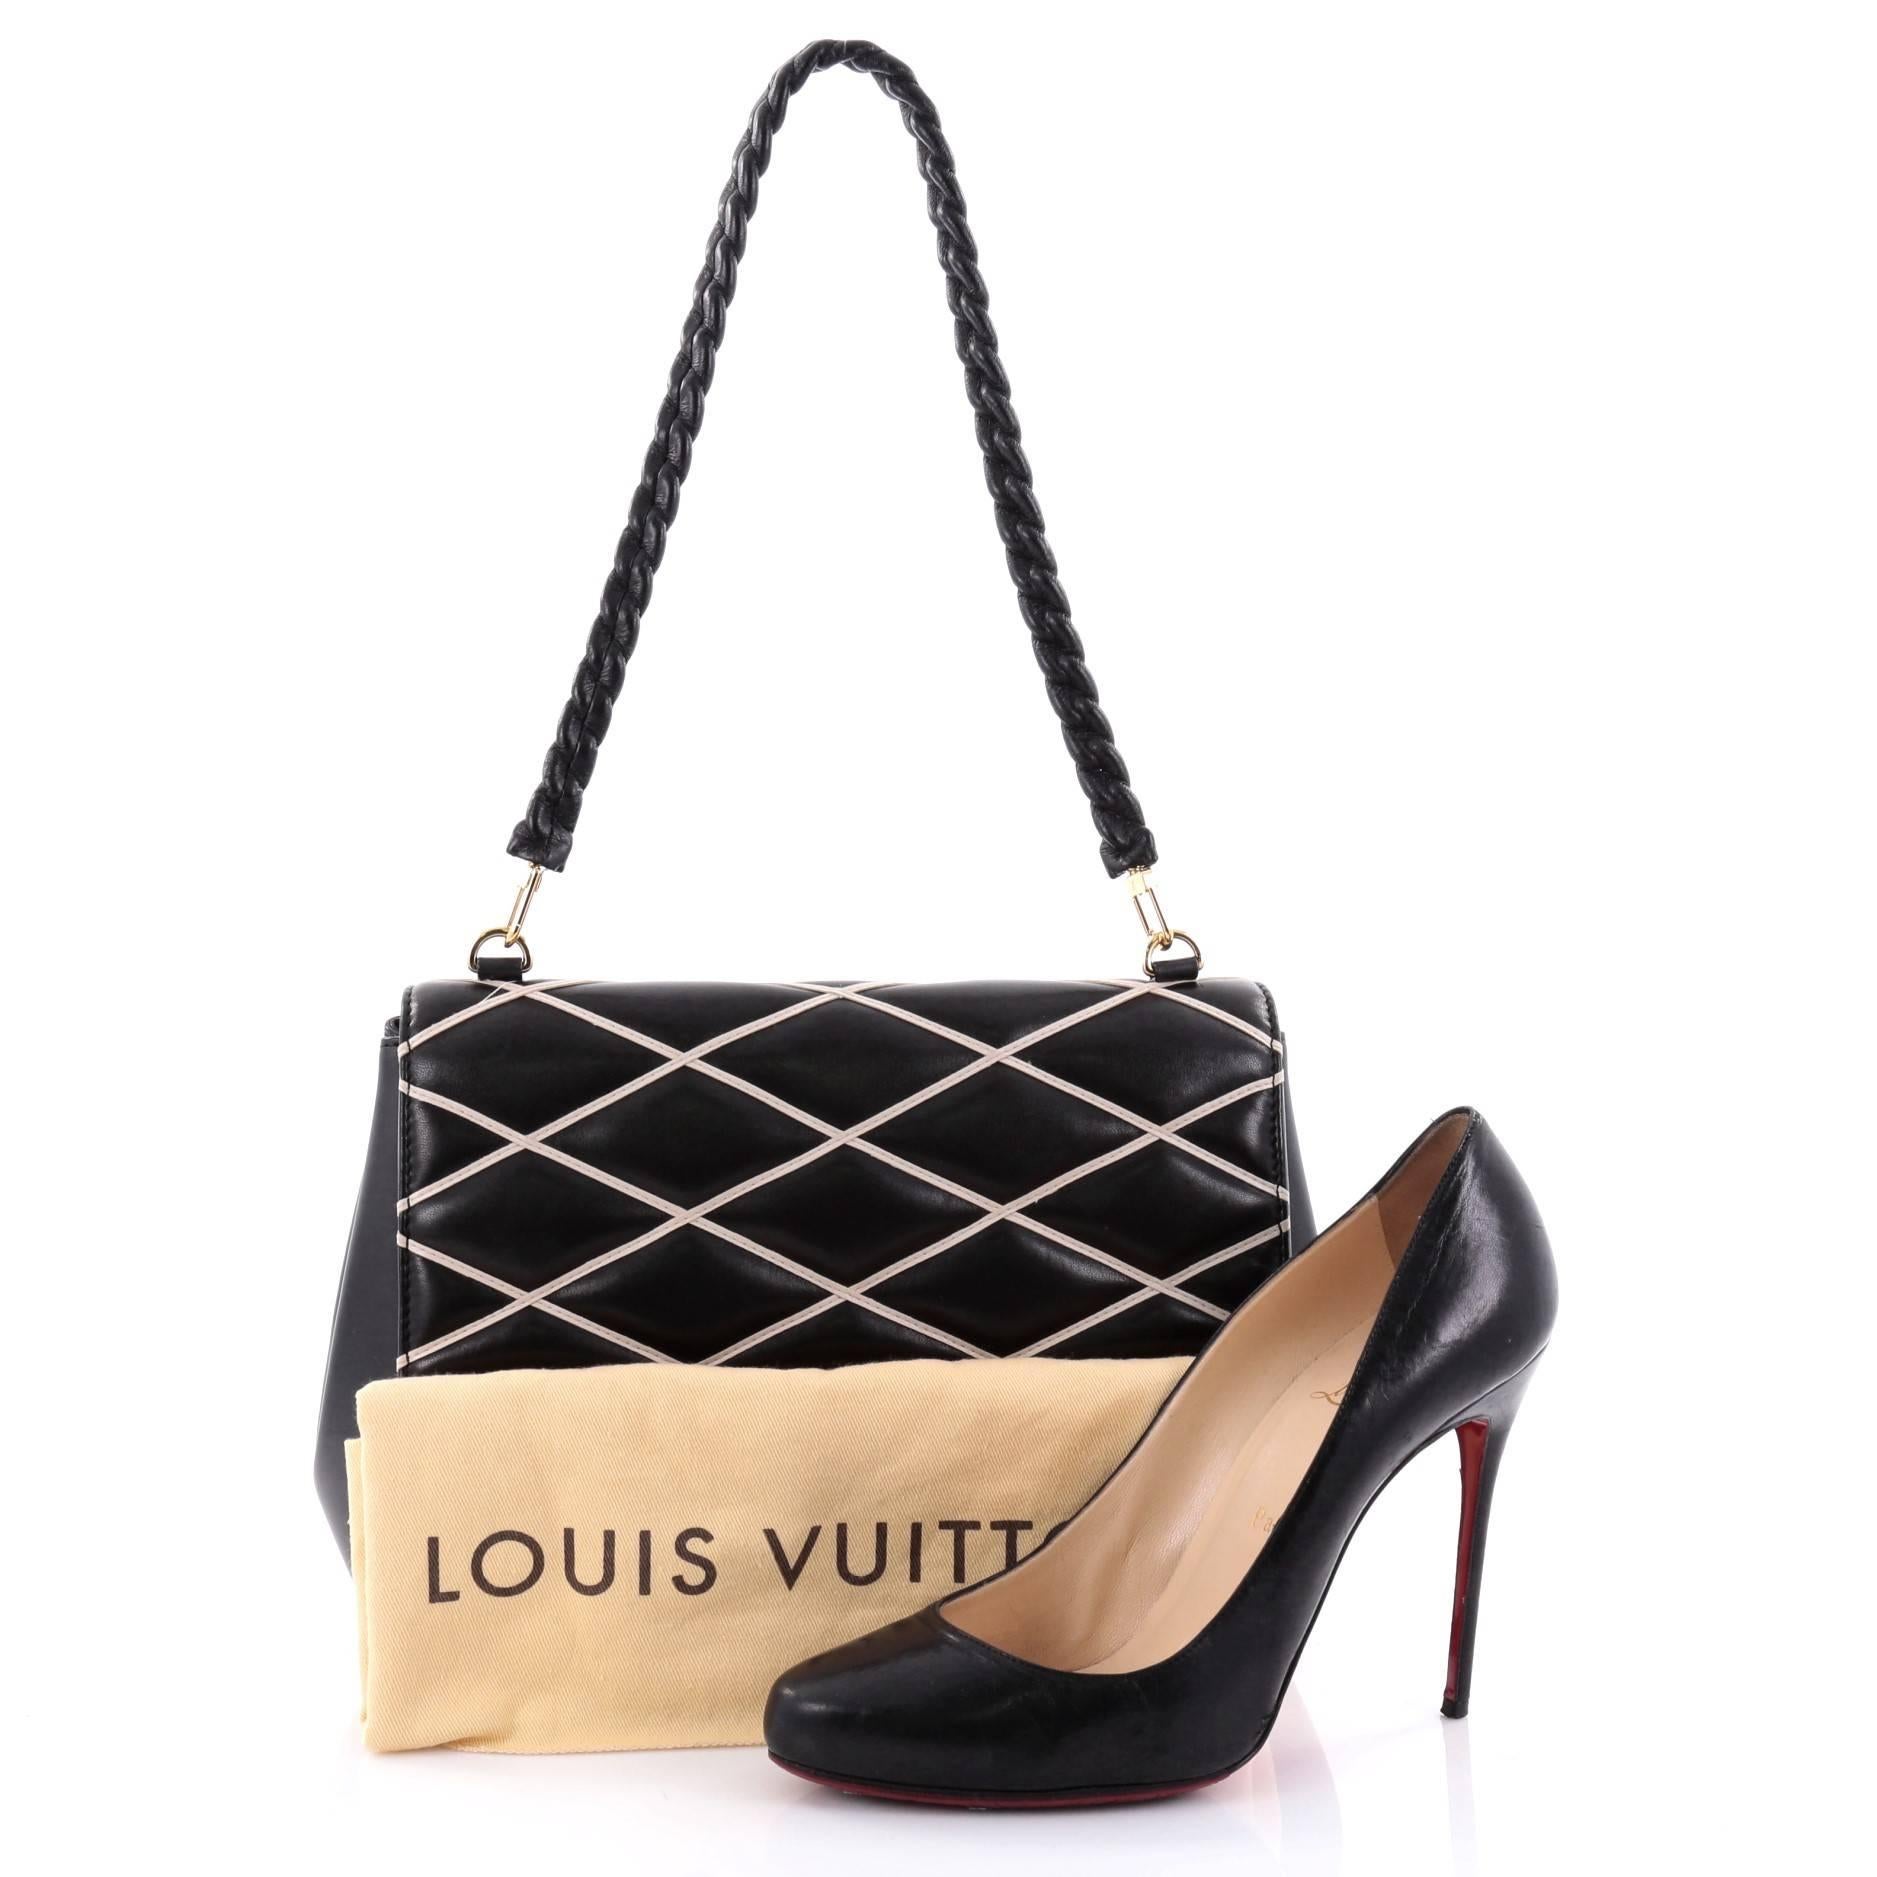 This authentic Louis Vuitton Pochette Flap Handbag Malletage Leather from the brand's Fall/Winter 2014 Runway Collection pays homage to Louis Vuitton's rich history of travel. Crafted from black and white quilted malletage lambskin leather, this